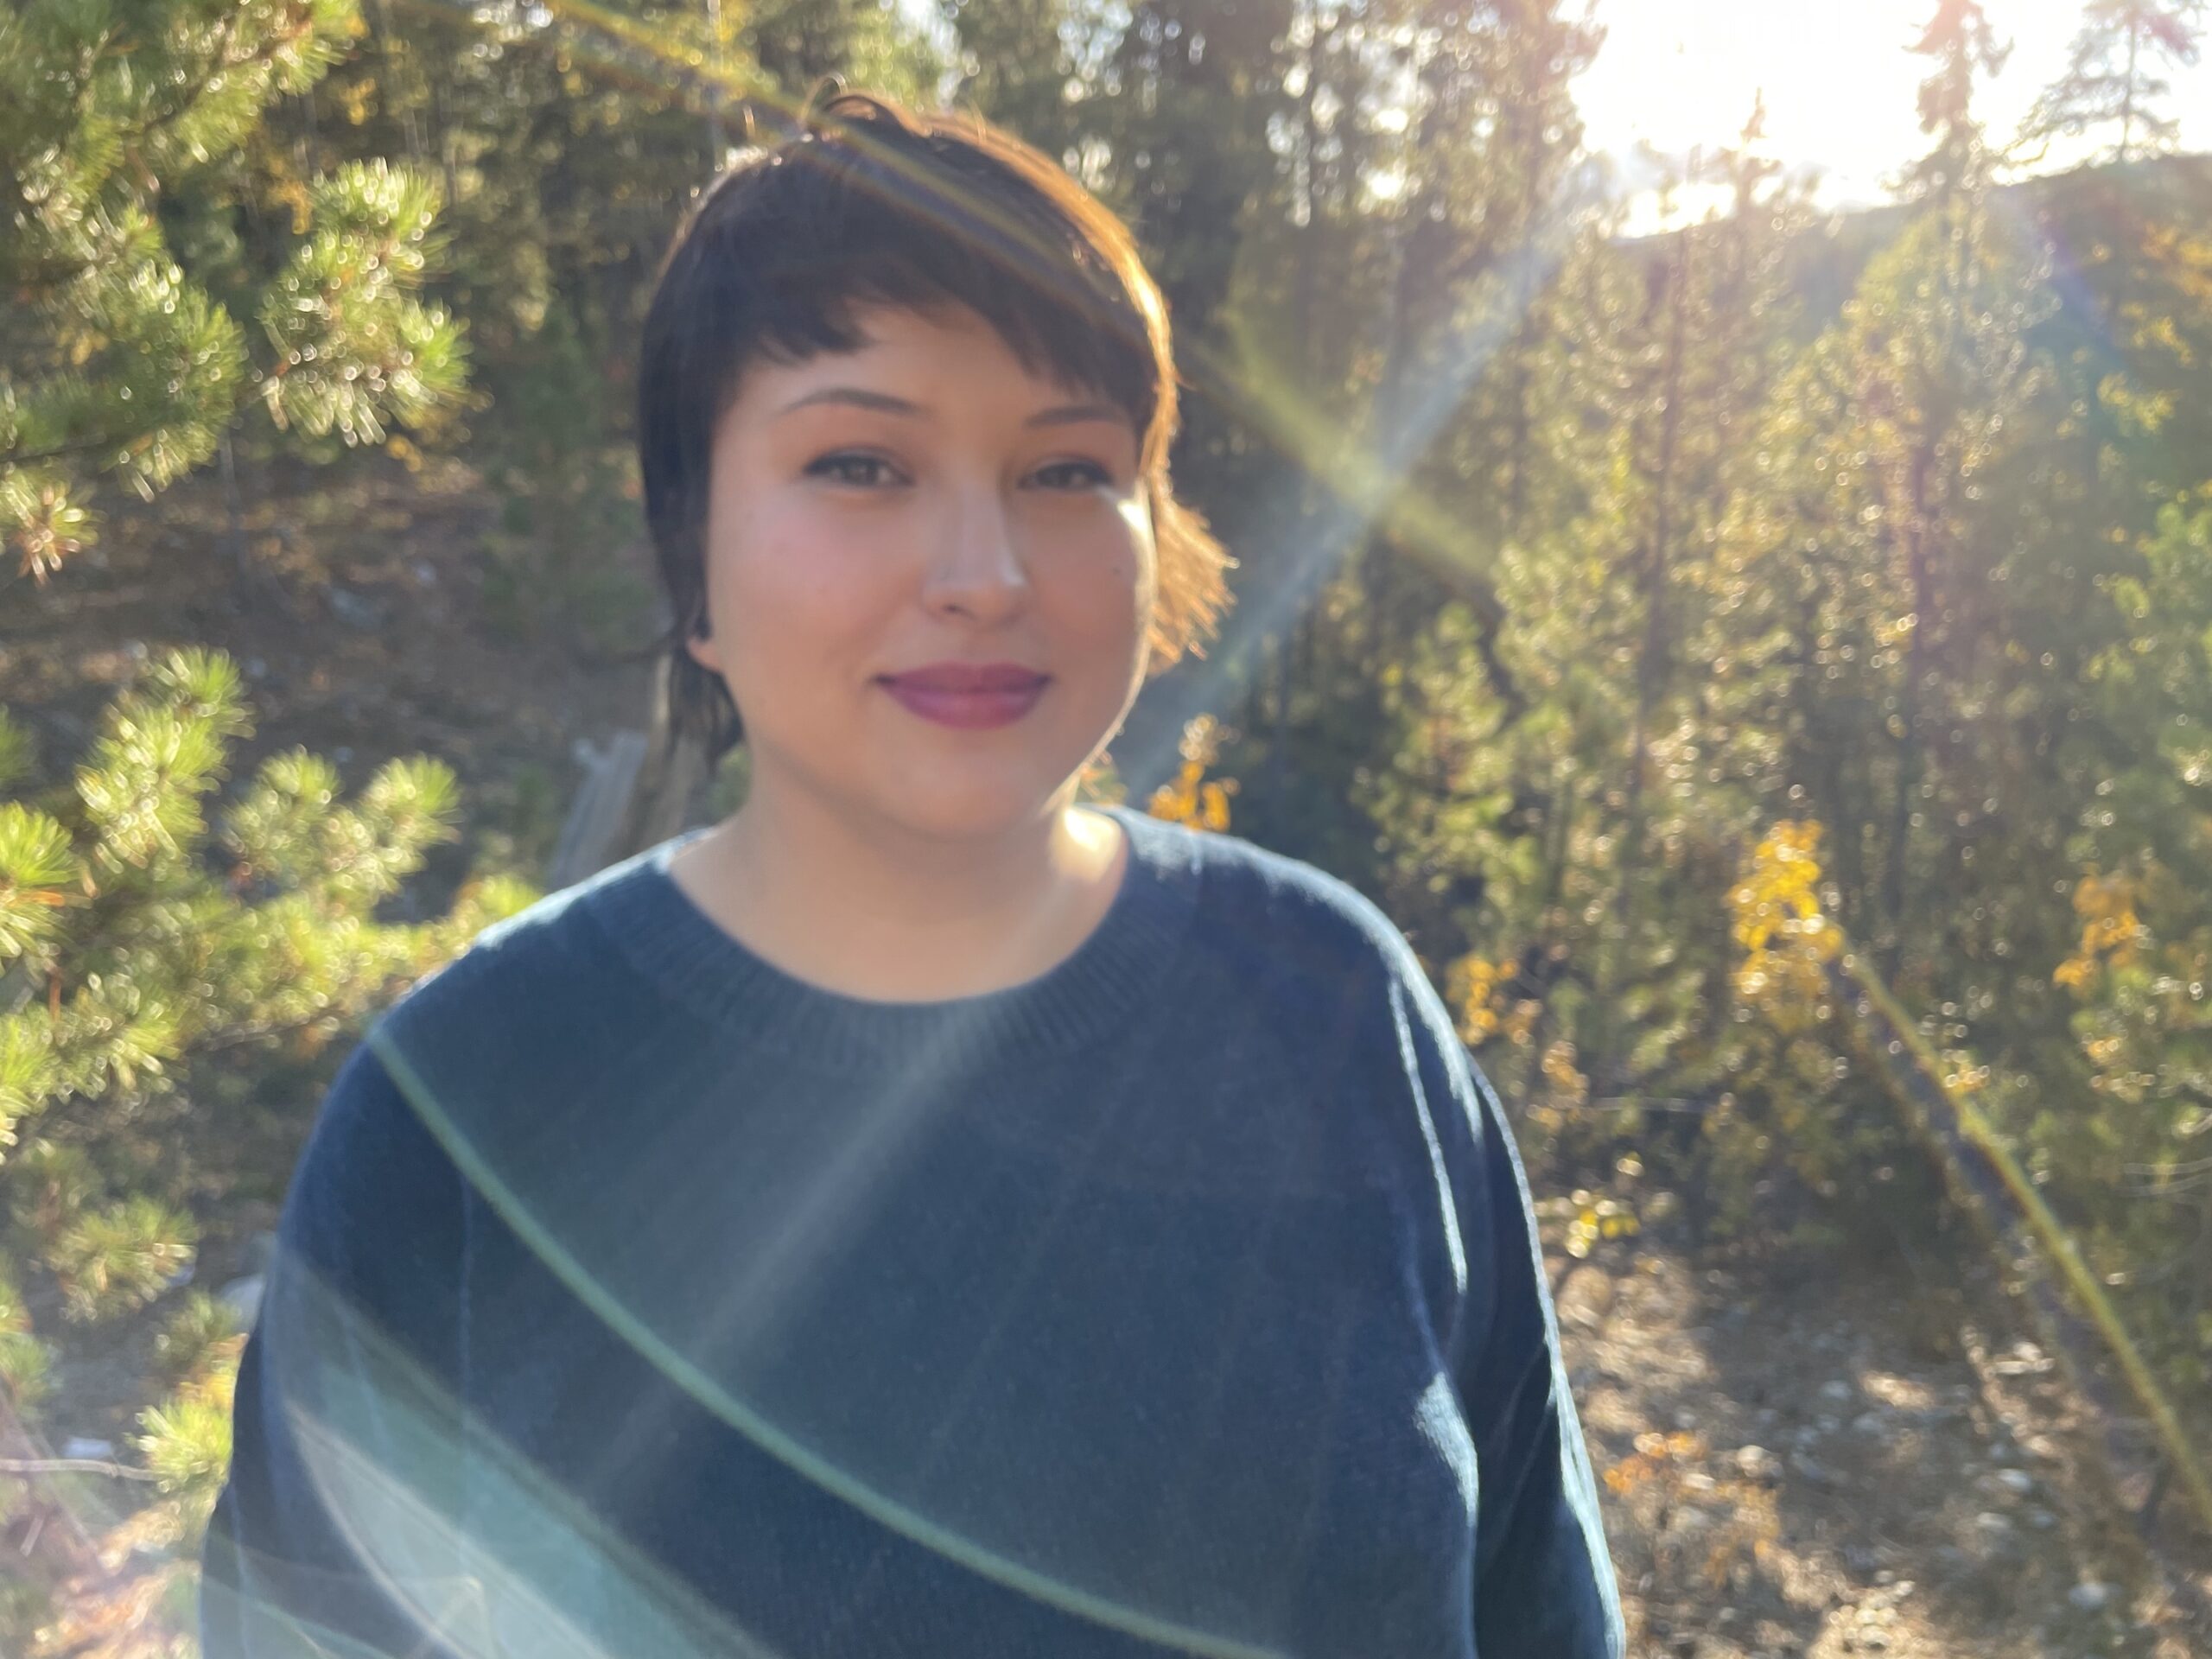 Heather ‘Von’ Steinhagen, a Cree/German person with light skin, brown hair, and dark eyes with her mouth closed, smiling at the camera. She is wearing a fuzzy blue sweater outdoors in a sunny boreal forest. There is a blue sun glare near her face.